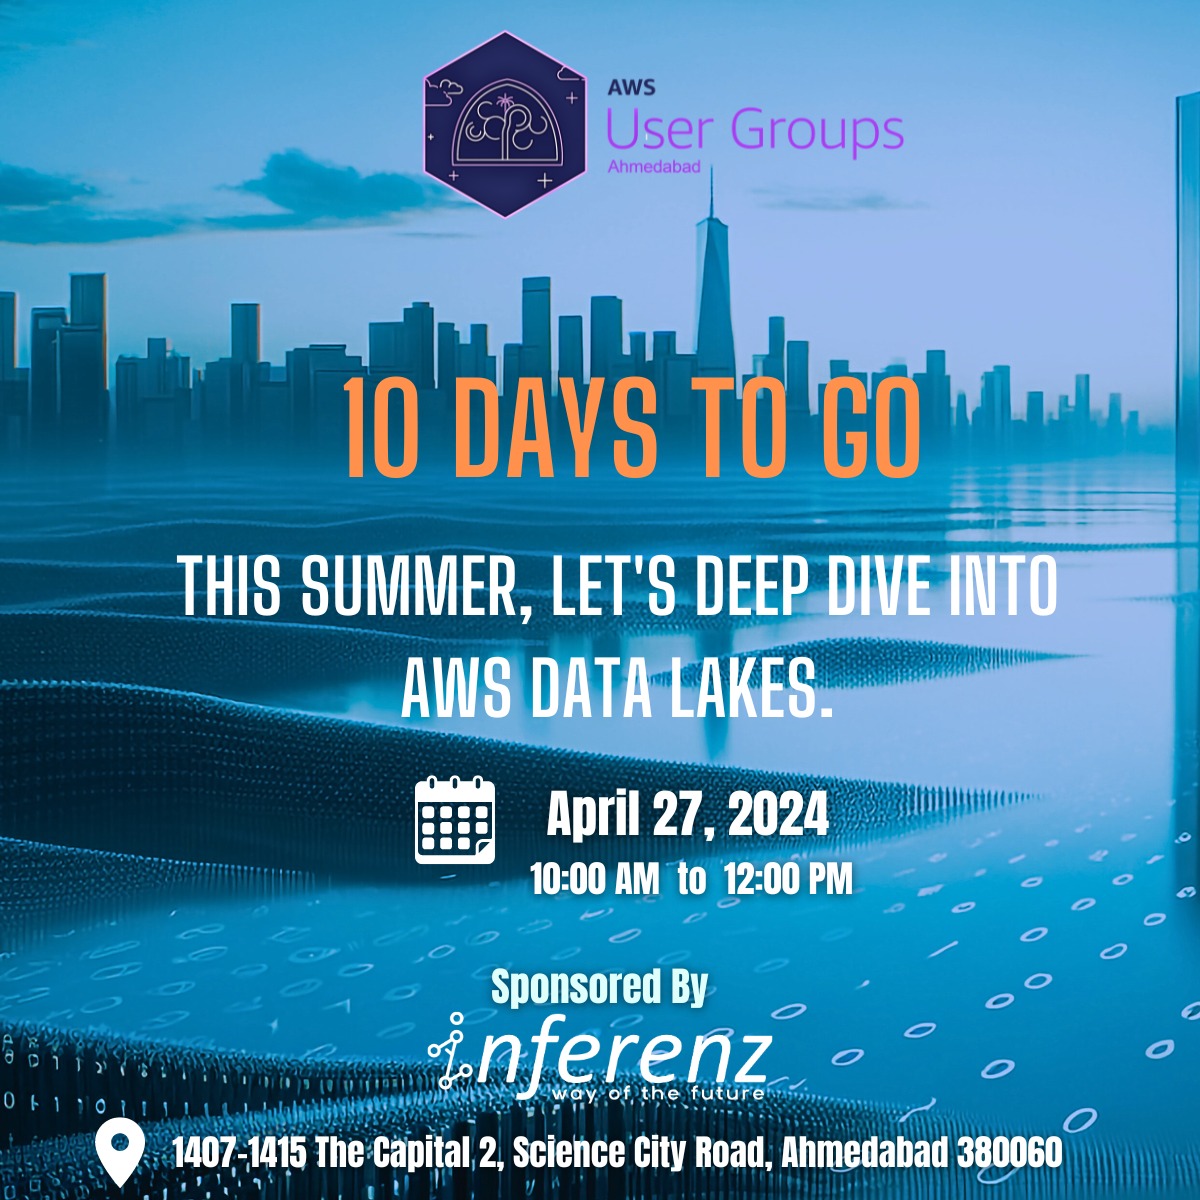 Embark on a journey of discovery with our sponsored session by Inferenz, where we delve into the transformative capabilities of AWS Data Lakes.

RSVP today here - lnkd.in/gPCwpq2z

#aws #awscloud #awsugah, #AWSEvents #DataLake #CloudComputing #Ahmedabad